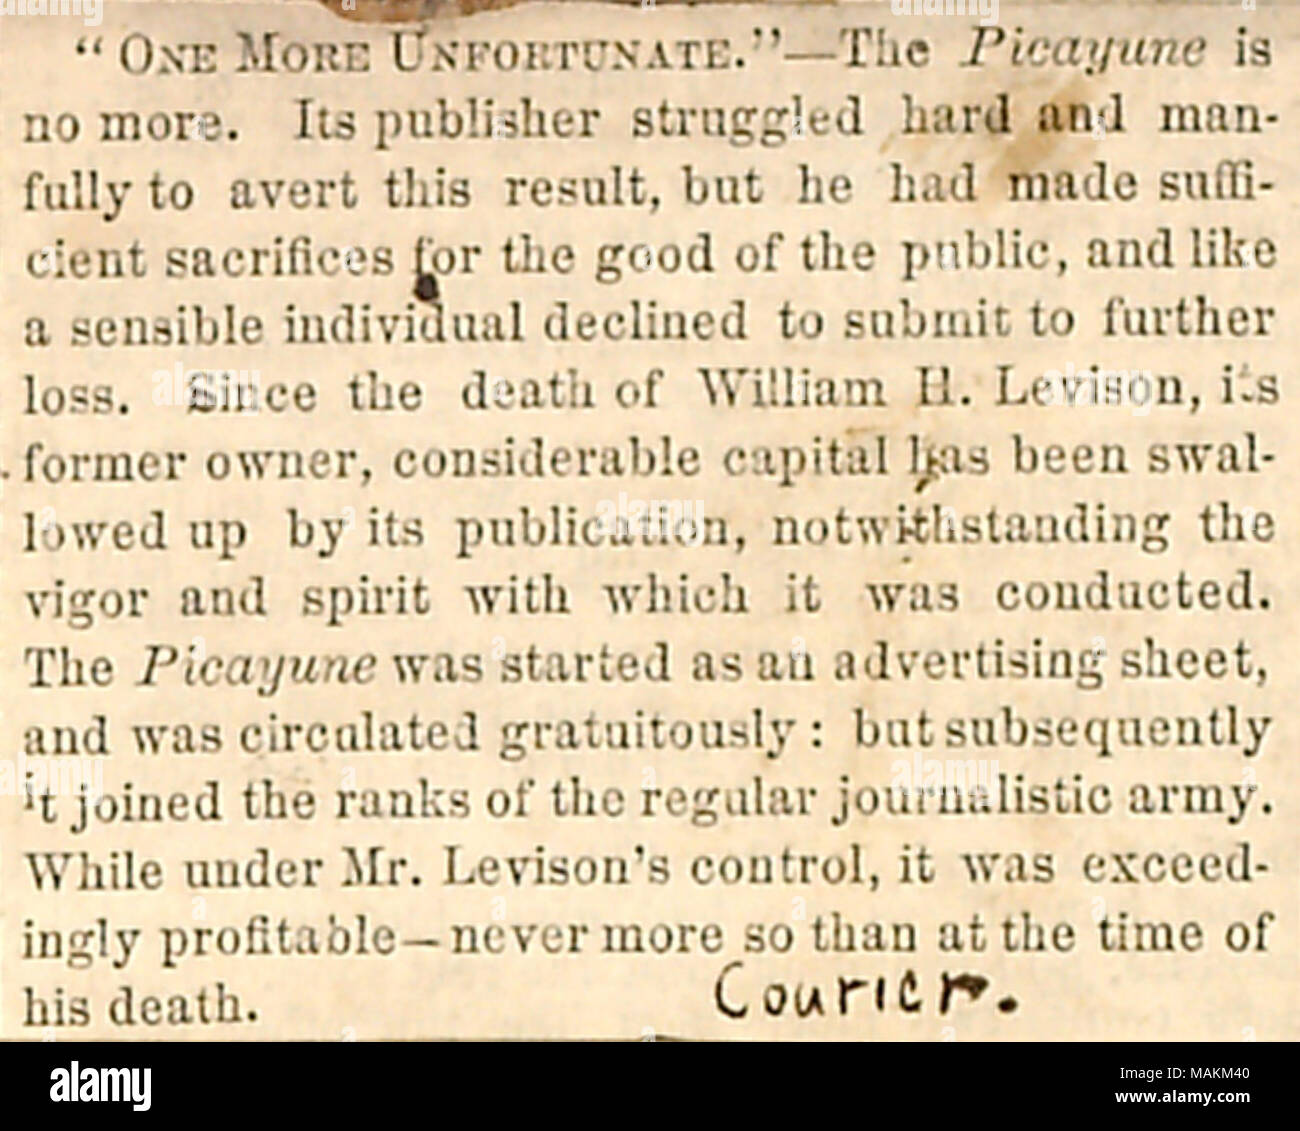 Newspaper clipping regarding the demise of The New York Picayune.  Transcription: 'ONE MORE UNFORTUNATE.'&mndash;The Picayune is no more. Its publisher struggled hard and manfully to avert this result, but he had made sufficient sacrifices for the good of the public, and like a sensible individual declined to submit to further loss. Since the death of William H. Levison, its former owner, considerable capital has been swallowed up by its publication, notwithstanding the vigor and spirit with which it was conducted. The Picayune was started as an advertising sheet, and was circulated gratuitous Stock Photo